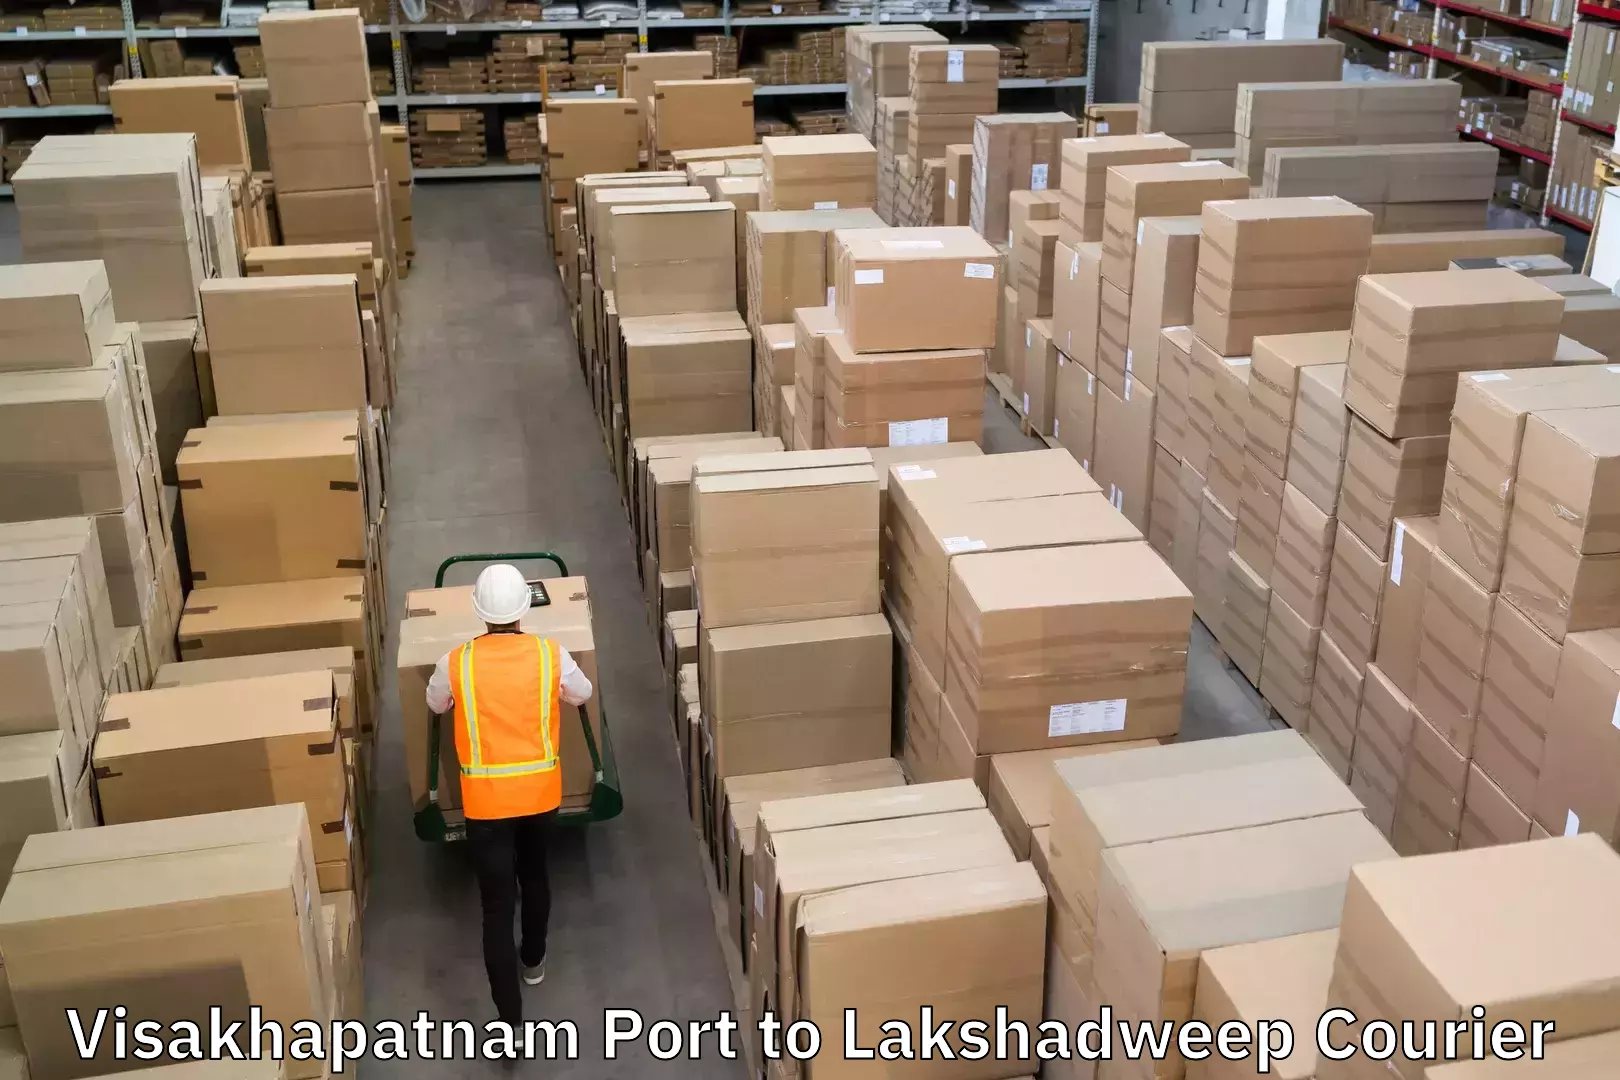 Global freight services Visakhapatnam Port to Lakshadweep